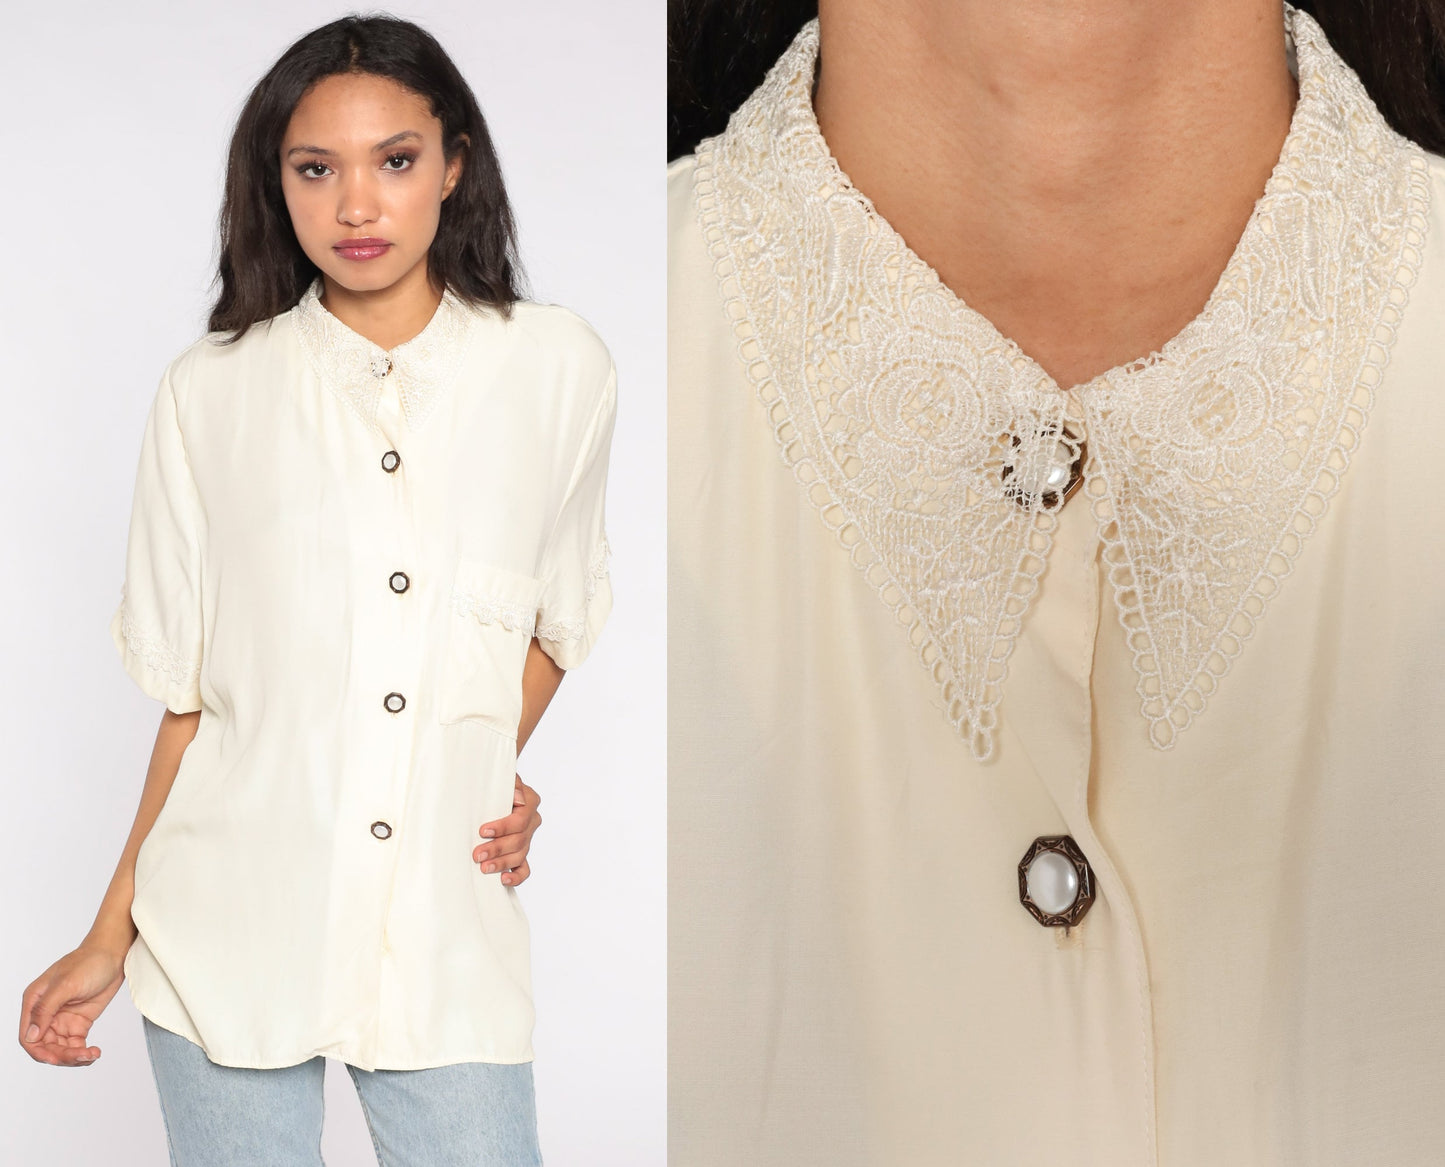 80s Cream Blouse Button Up Lace Collar Shirt Victorian Style Blouse Vintage Plain Simple Collared Top 1980s Romantic Short Sleeve 2xl xxl